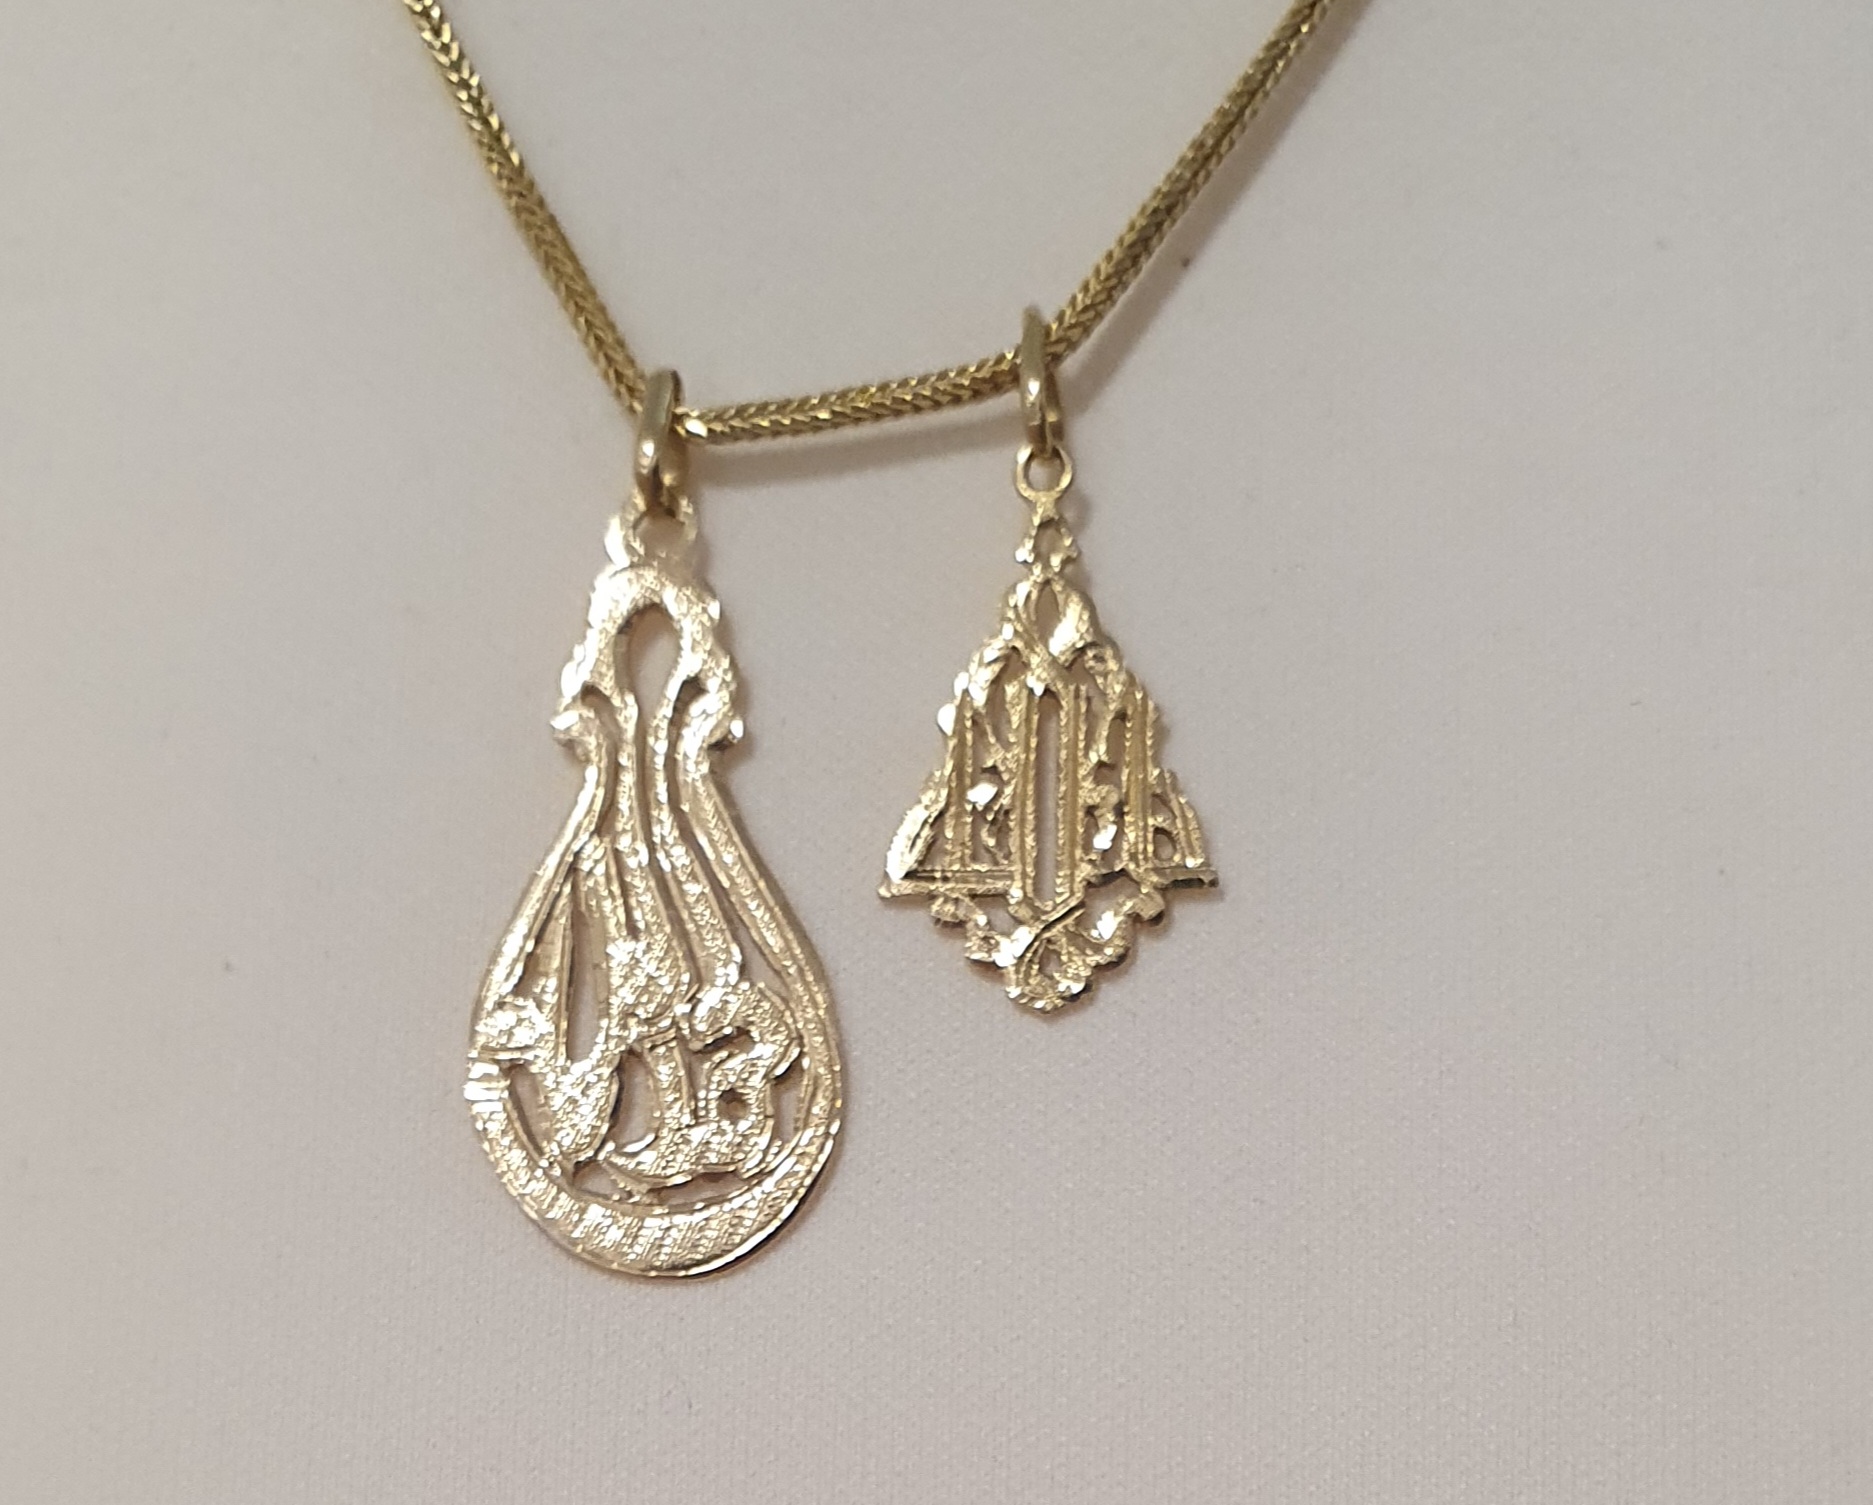 18ct Gold Pear Pendant plus one other with 9ct Chain, total weight 15.7g. Chain length is 20 inches. - Image 3 of 3